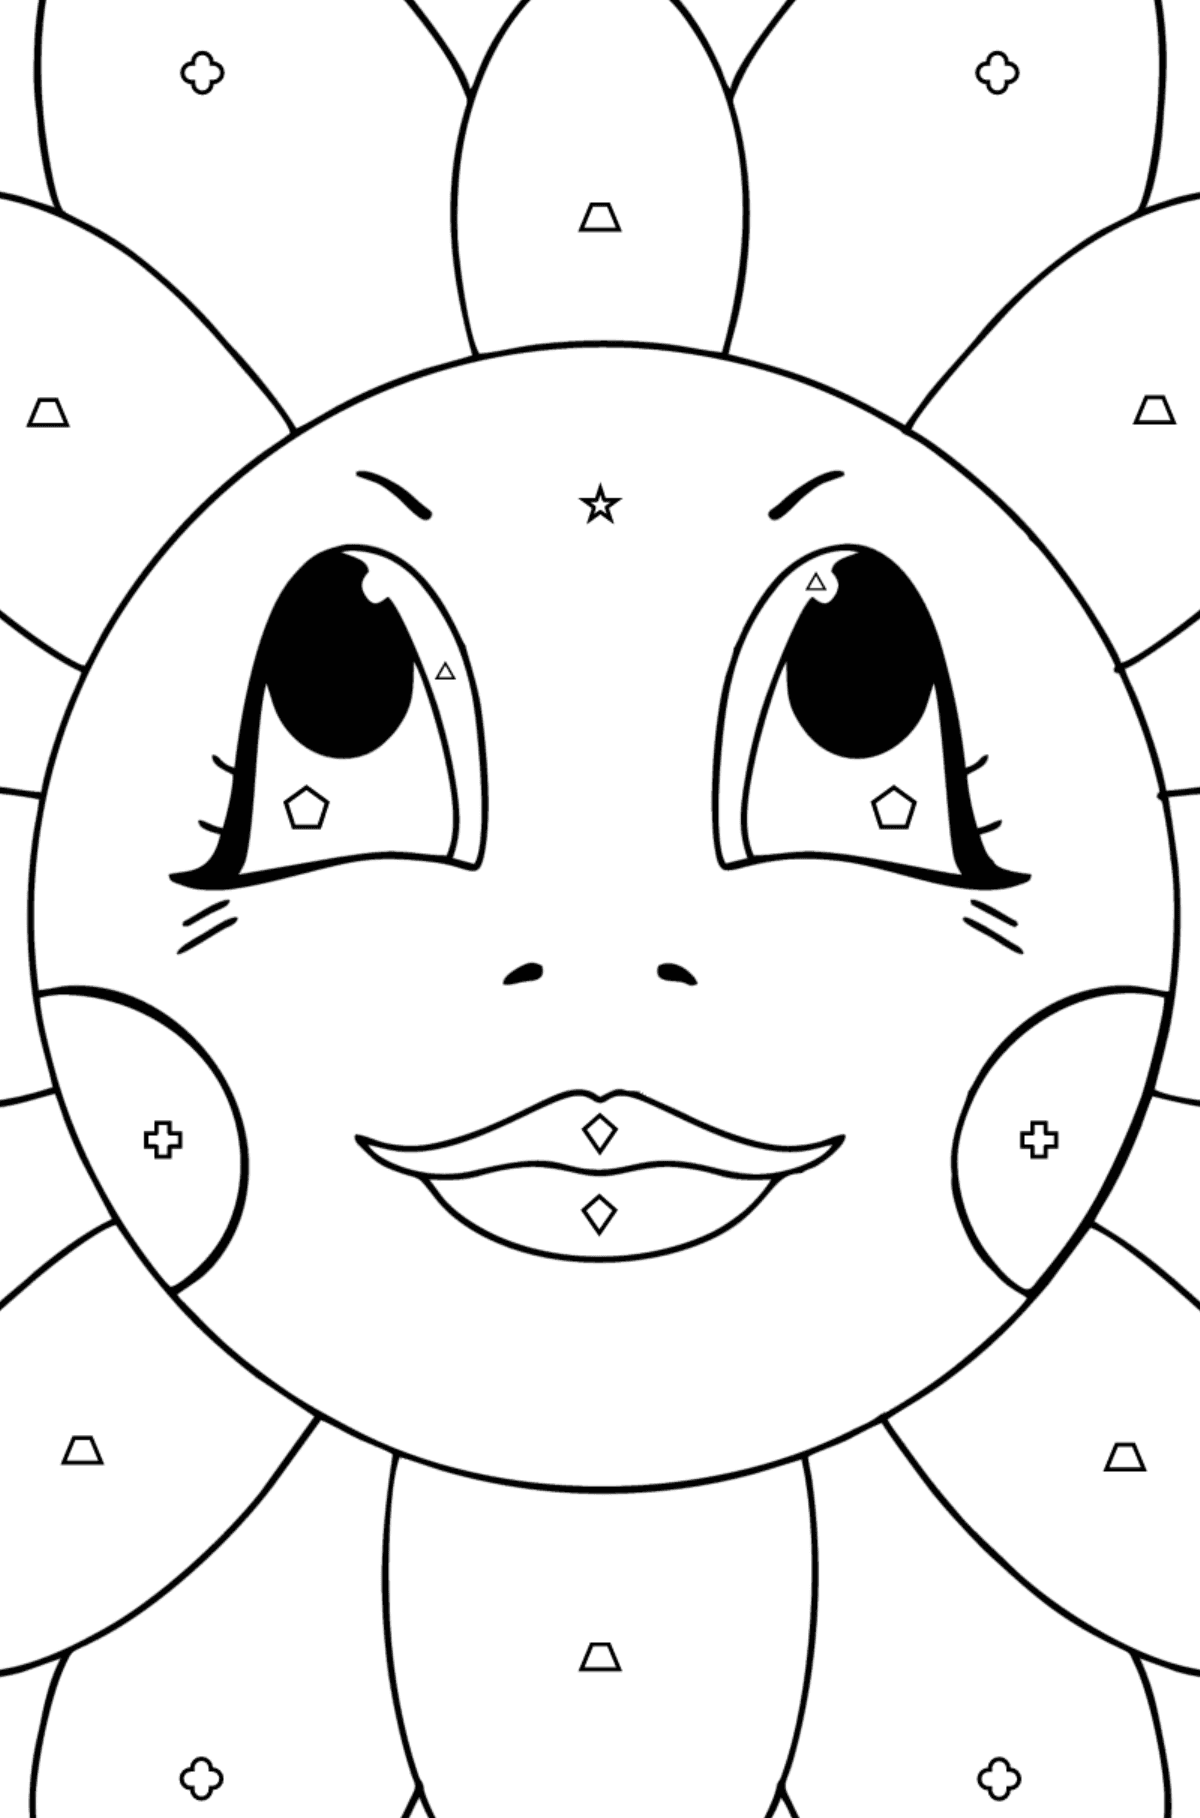 Chamomile with eyes coloring page - Coloring by Geometric Shapes for Kids